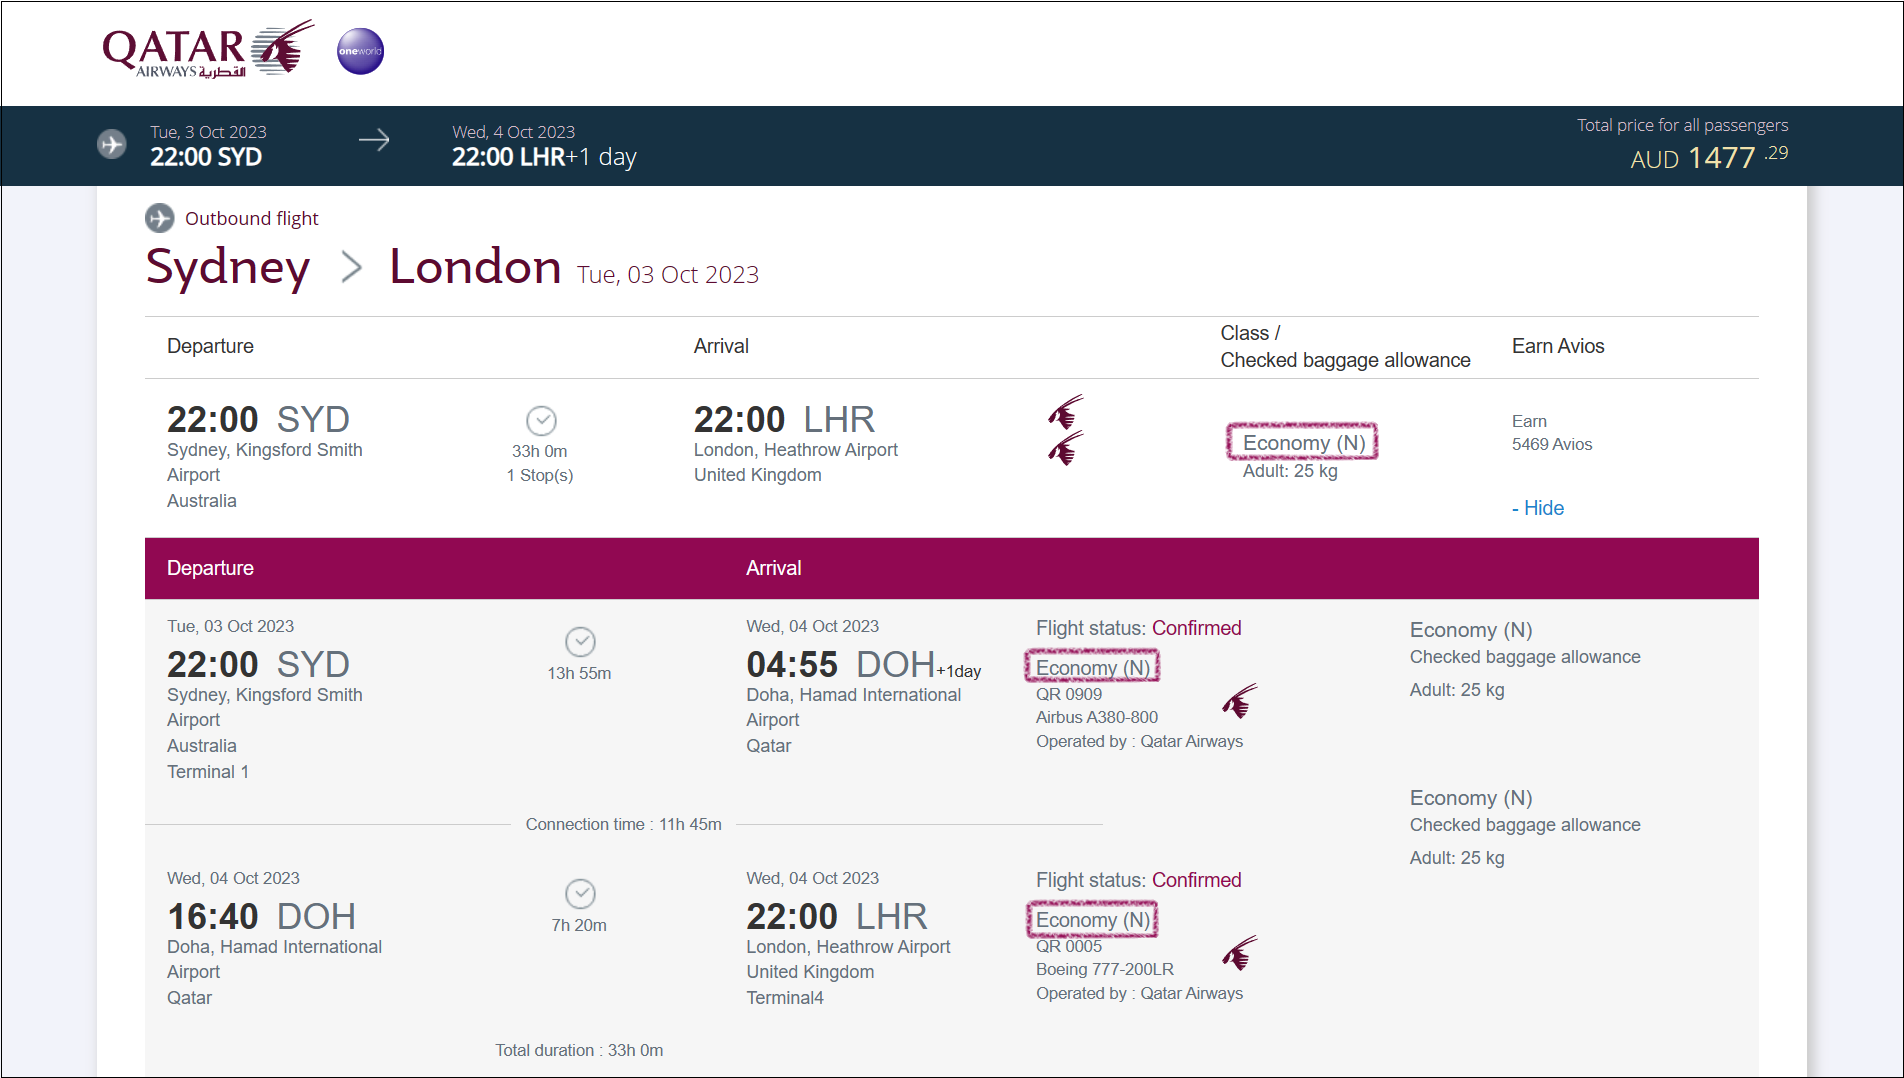 Your Qatar Airways fare letter helps determine where you should credit your flights.